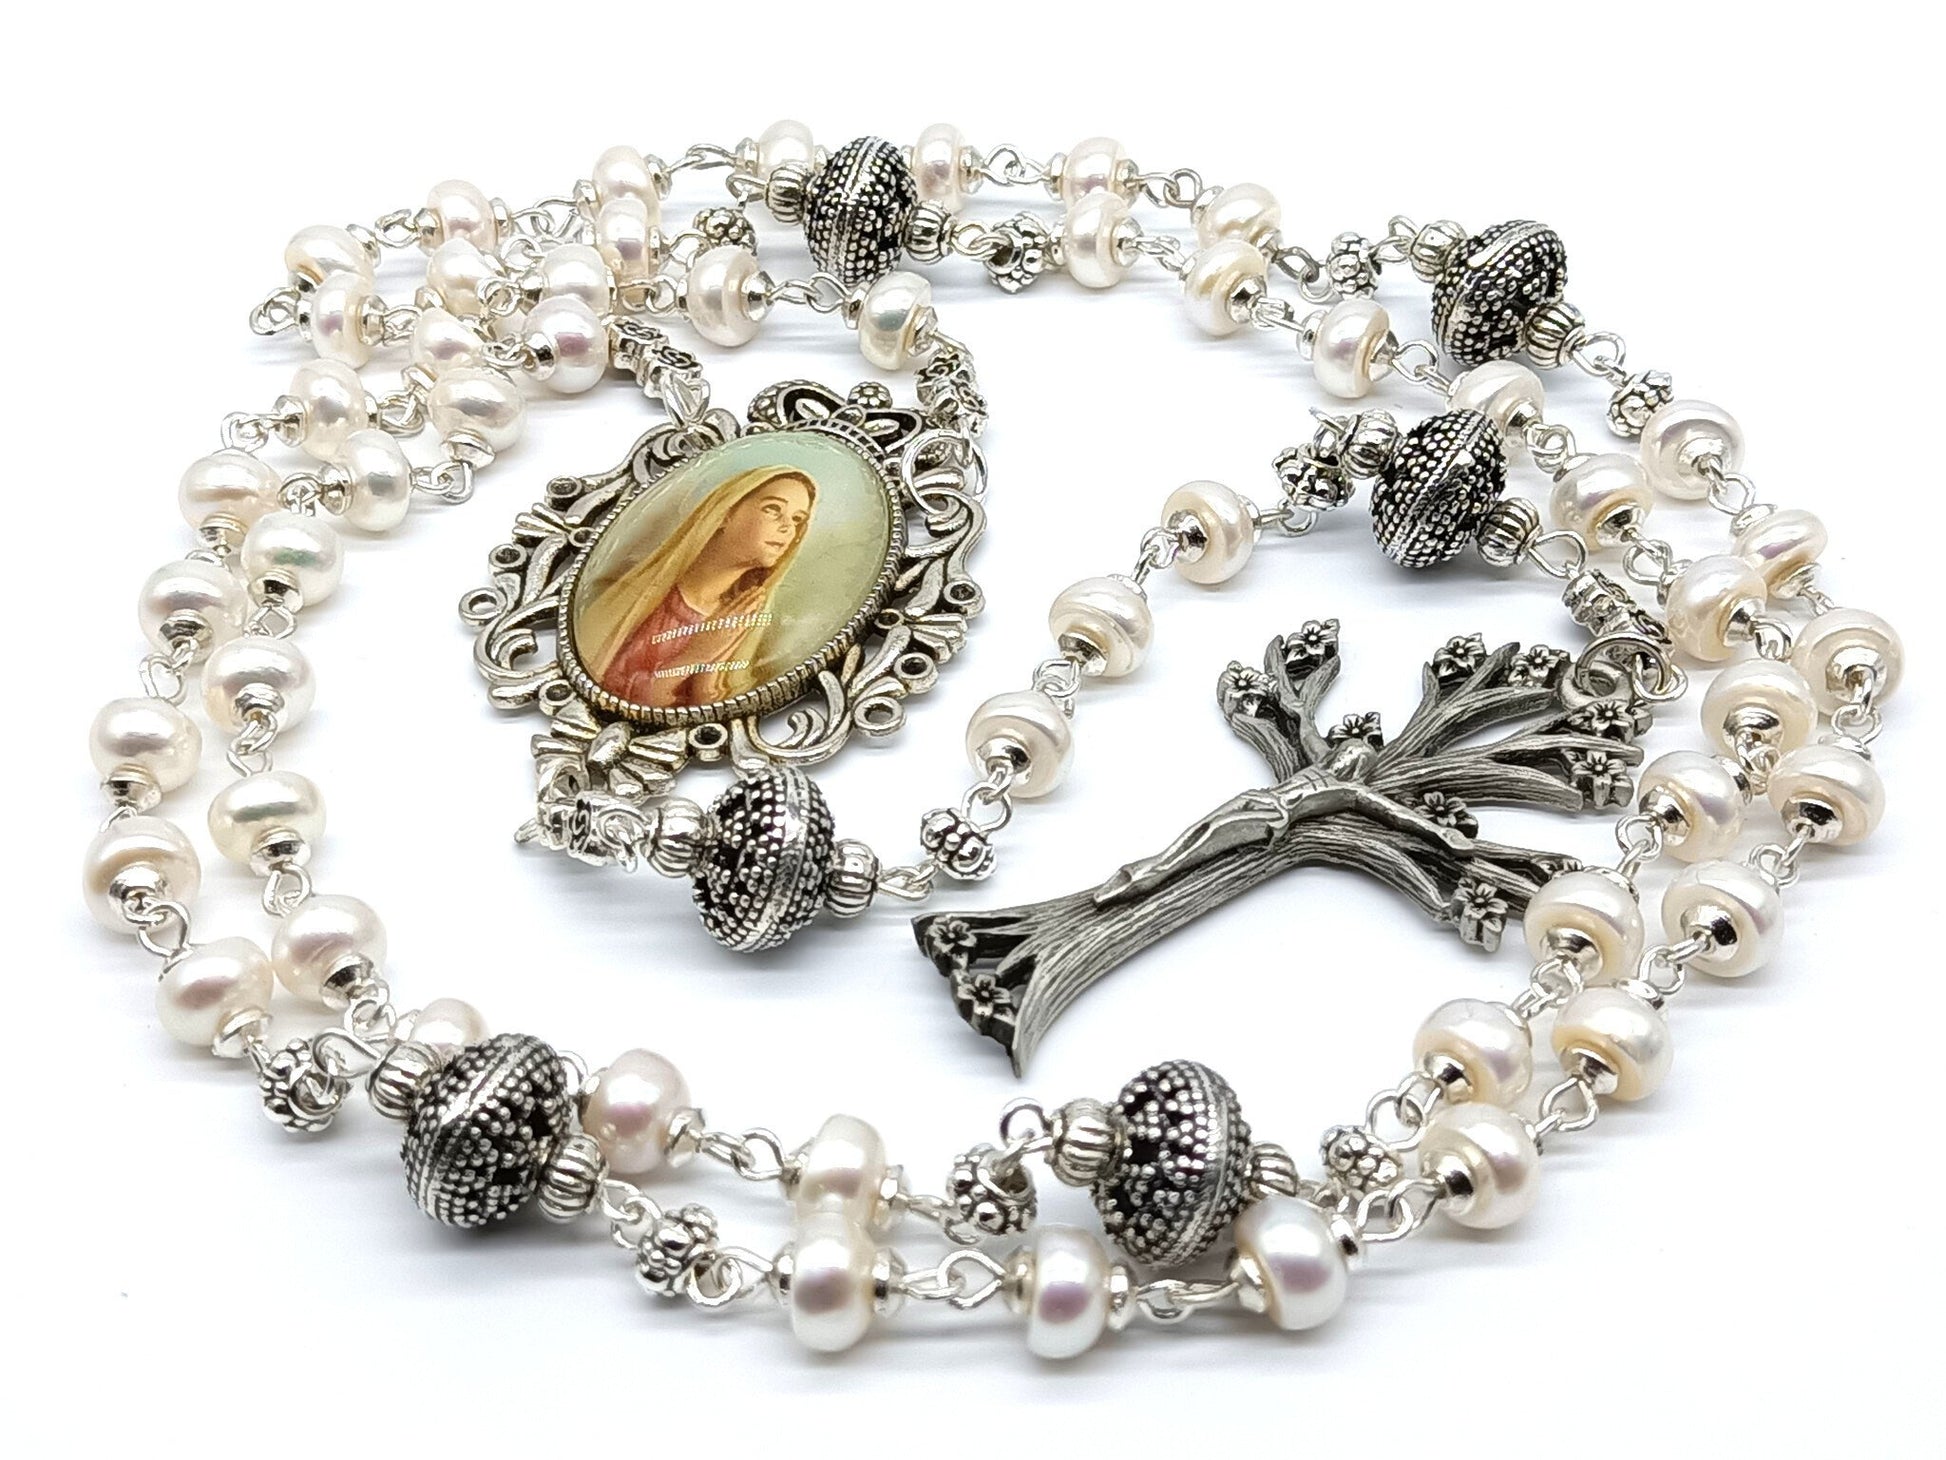 Genuine pearl unique rosary beads with dog wood crucifix, silver Our Ladys fiat picture medal and silver pater beads.